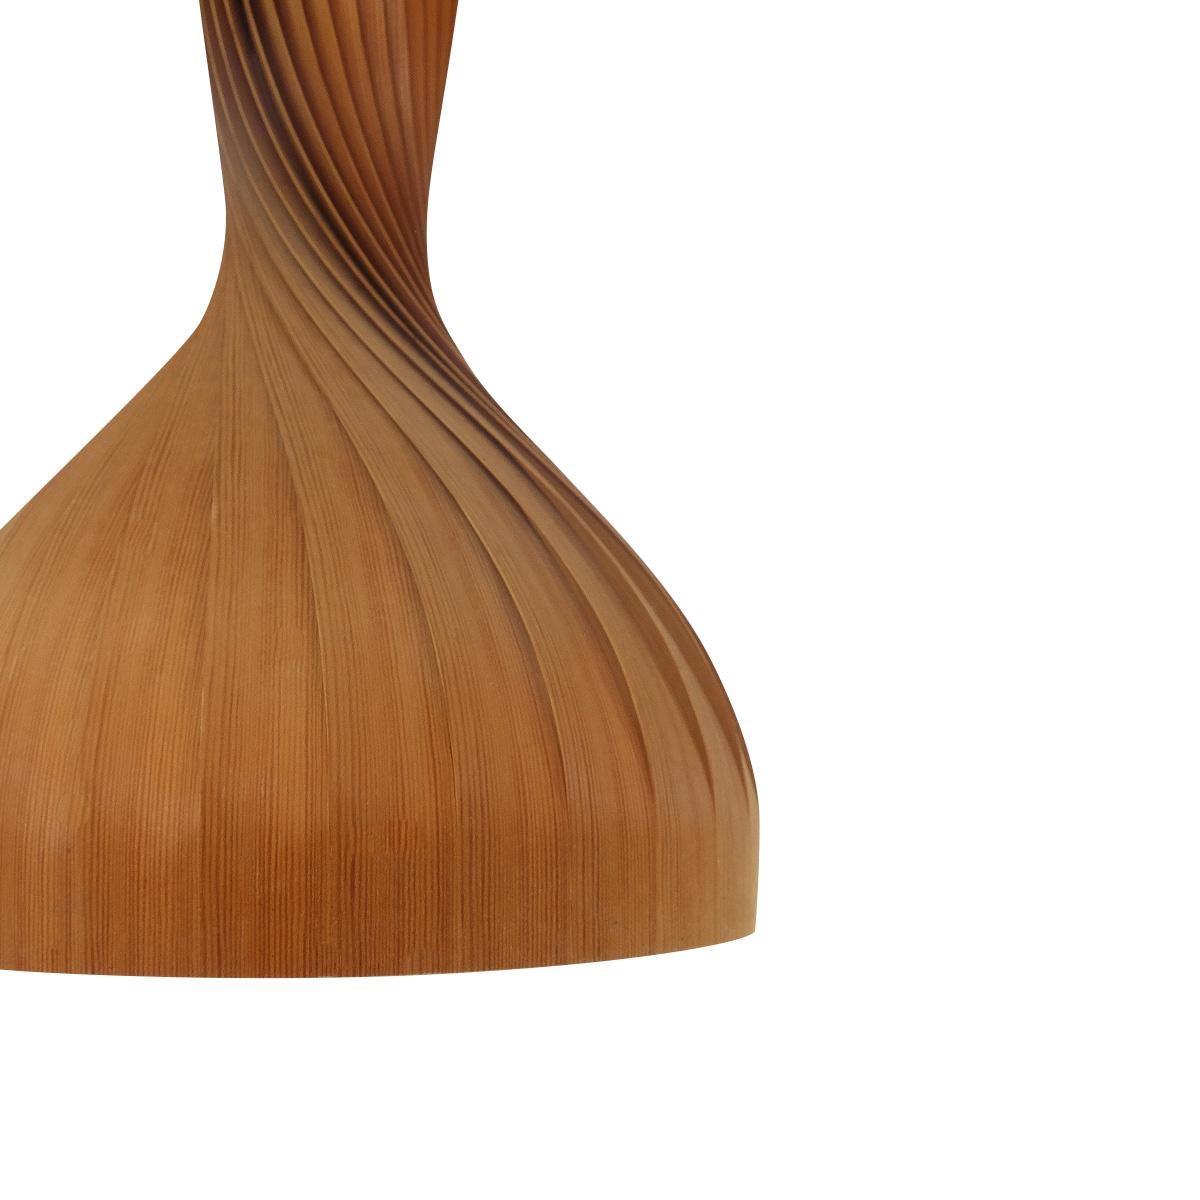 Vintage pendant produced by AB Markaryd, Sweden, design Hans-Agne Jakobsson:

Whether these lamps are turned on or off, they are real eye catchers in any interior, beautifully created with many layers of pinewood bent into a “swirl” that widens